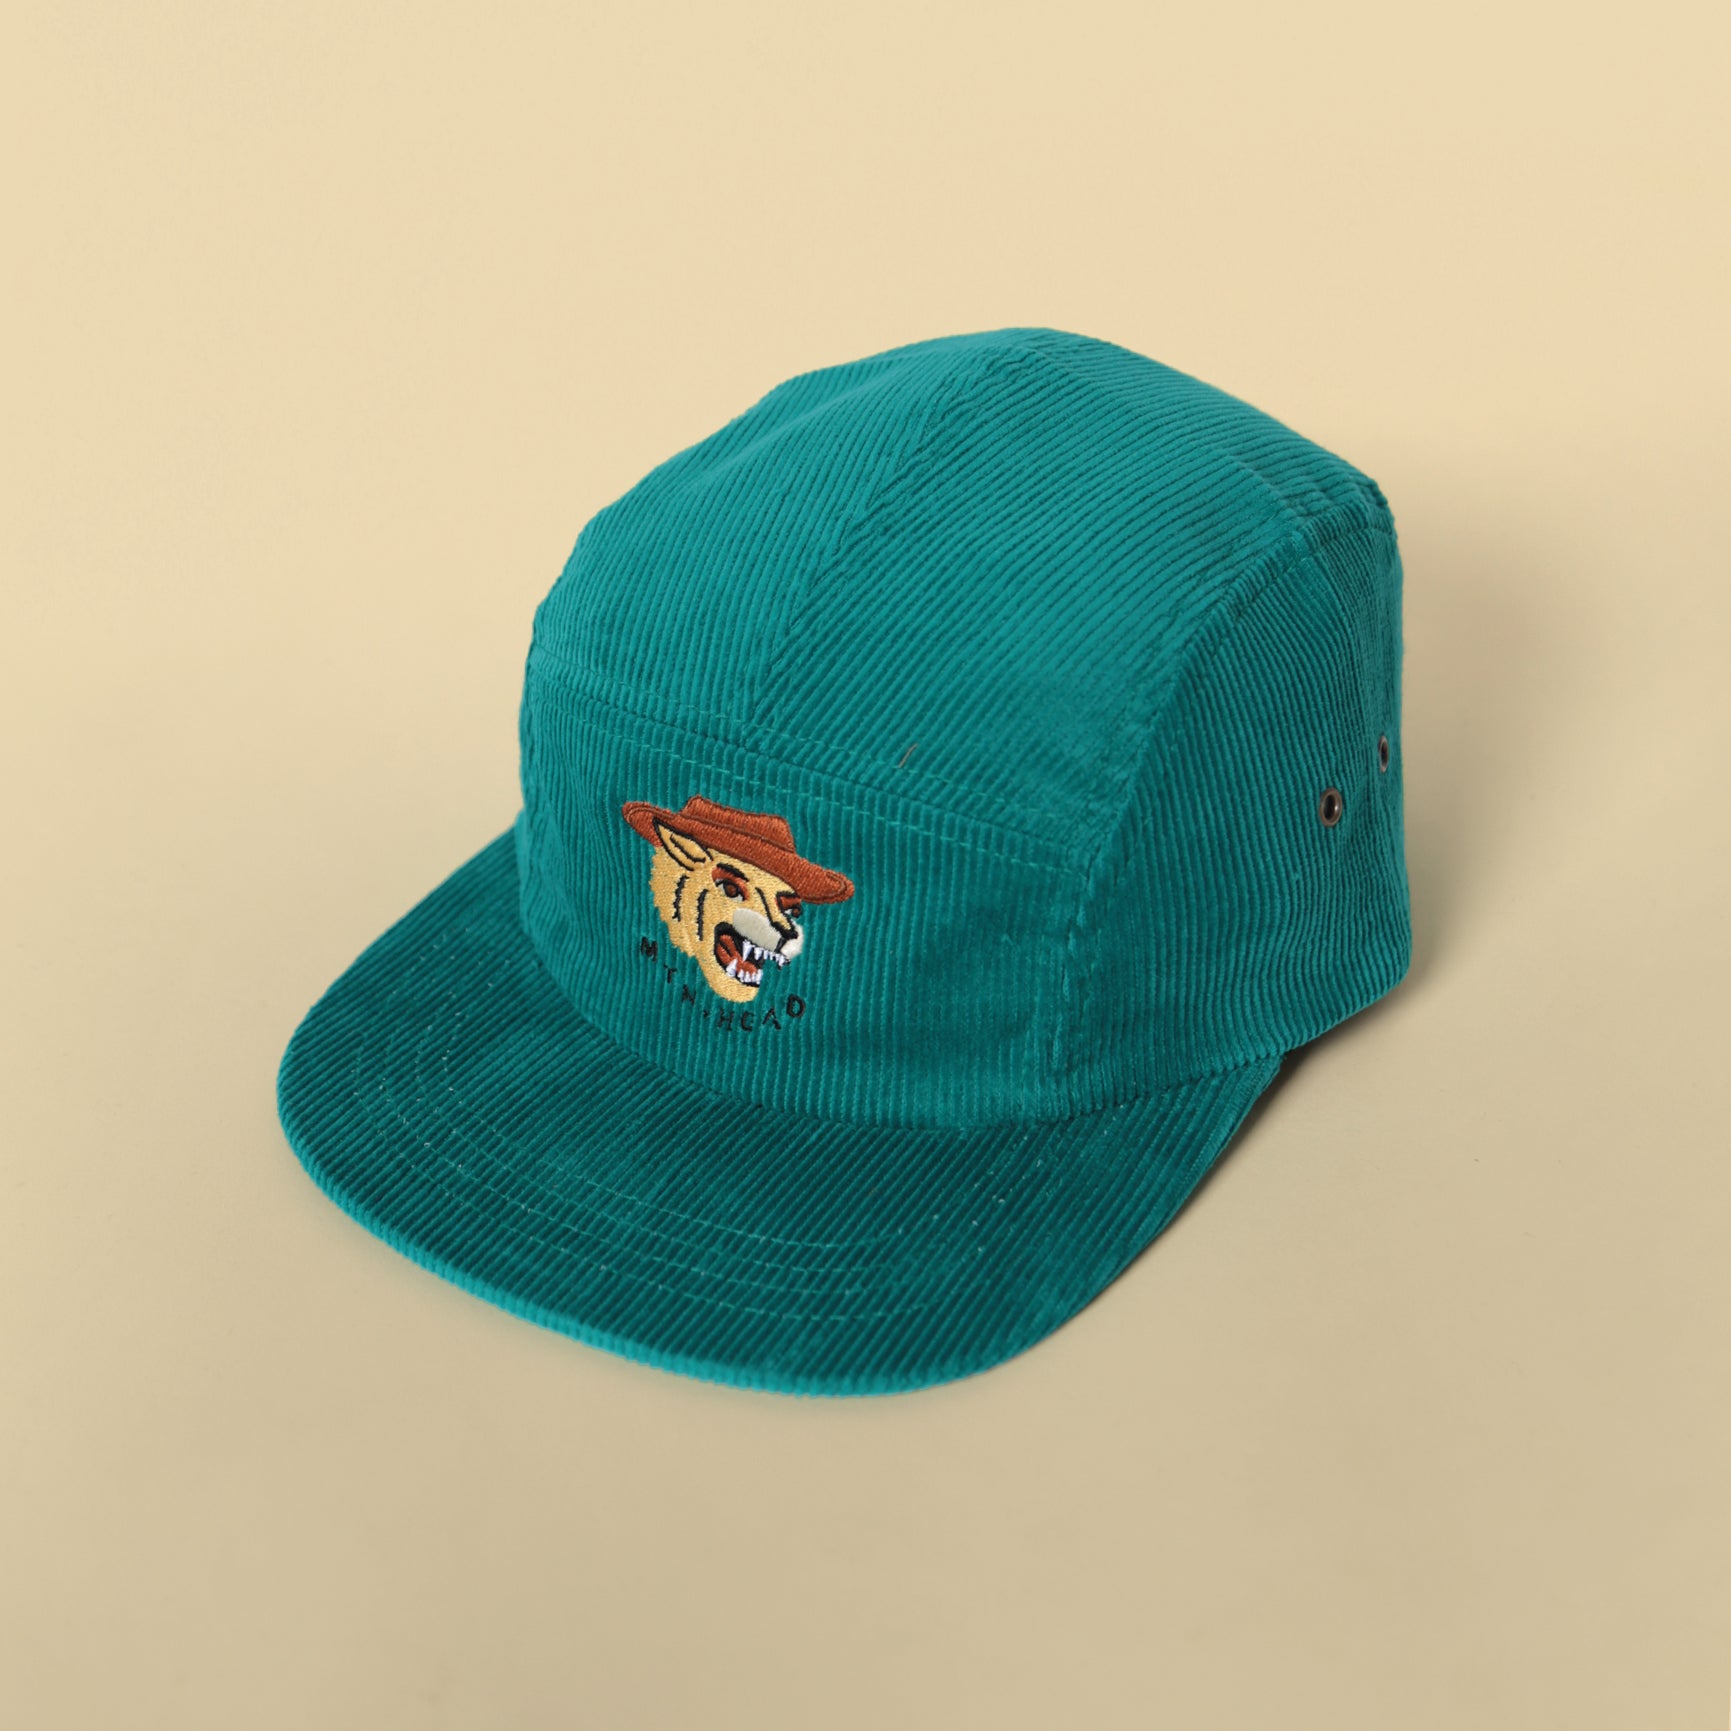 5 Panel - Teal Cord - Cowboy Dog Embroidery